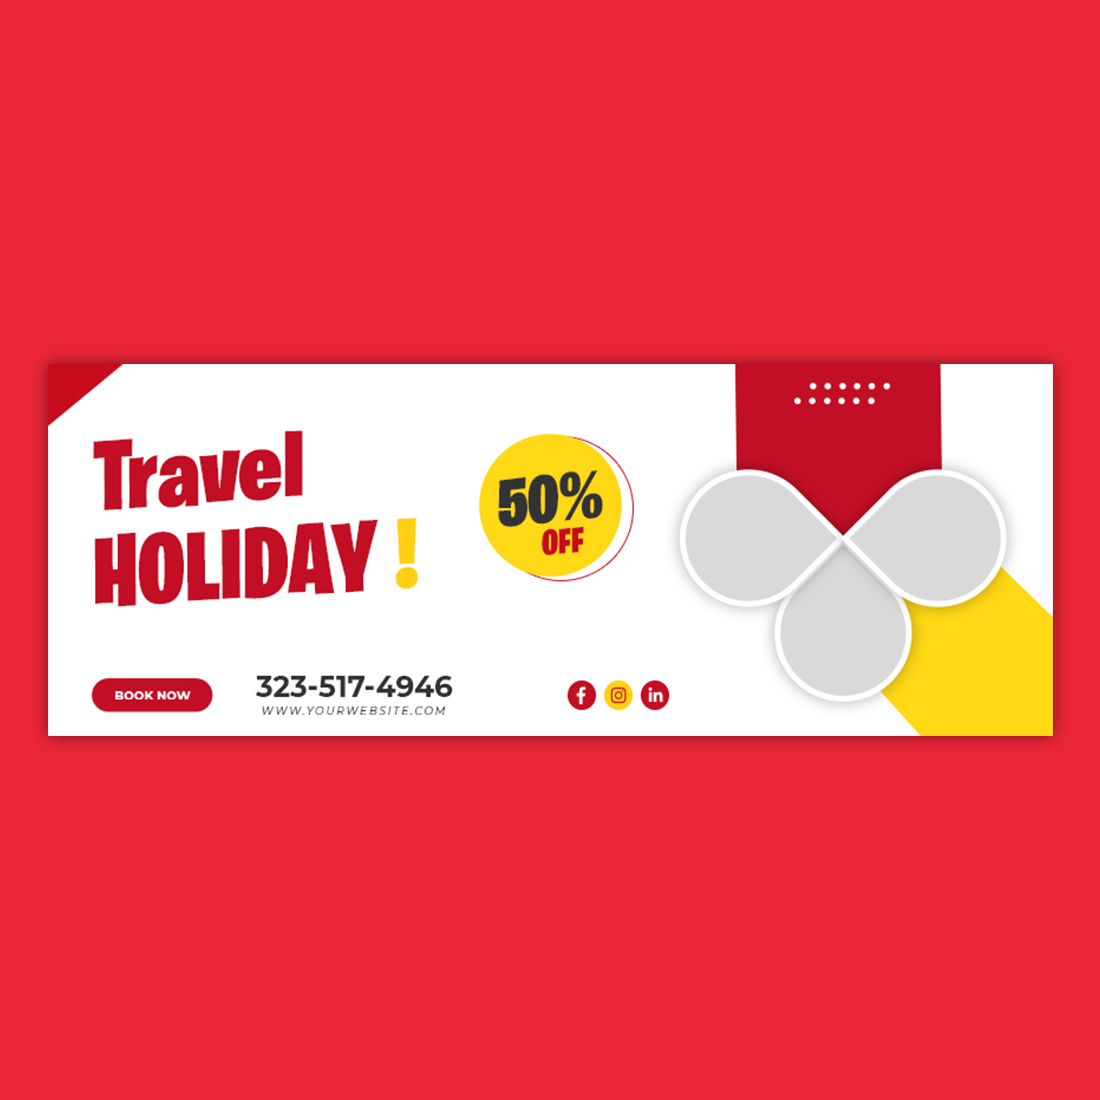 Travel Holiday Facebook cover Template preview image.